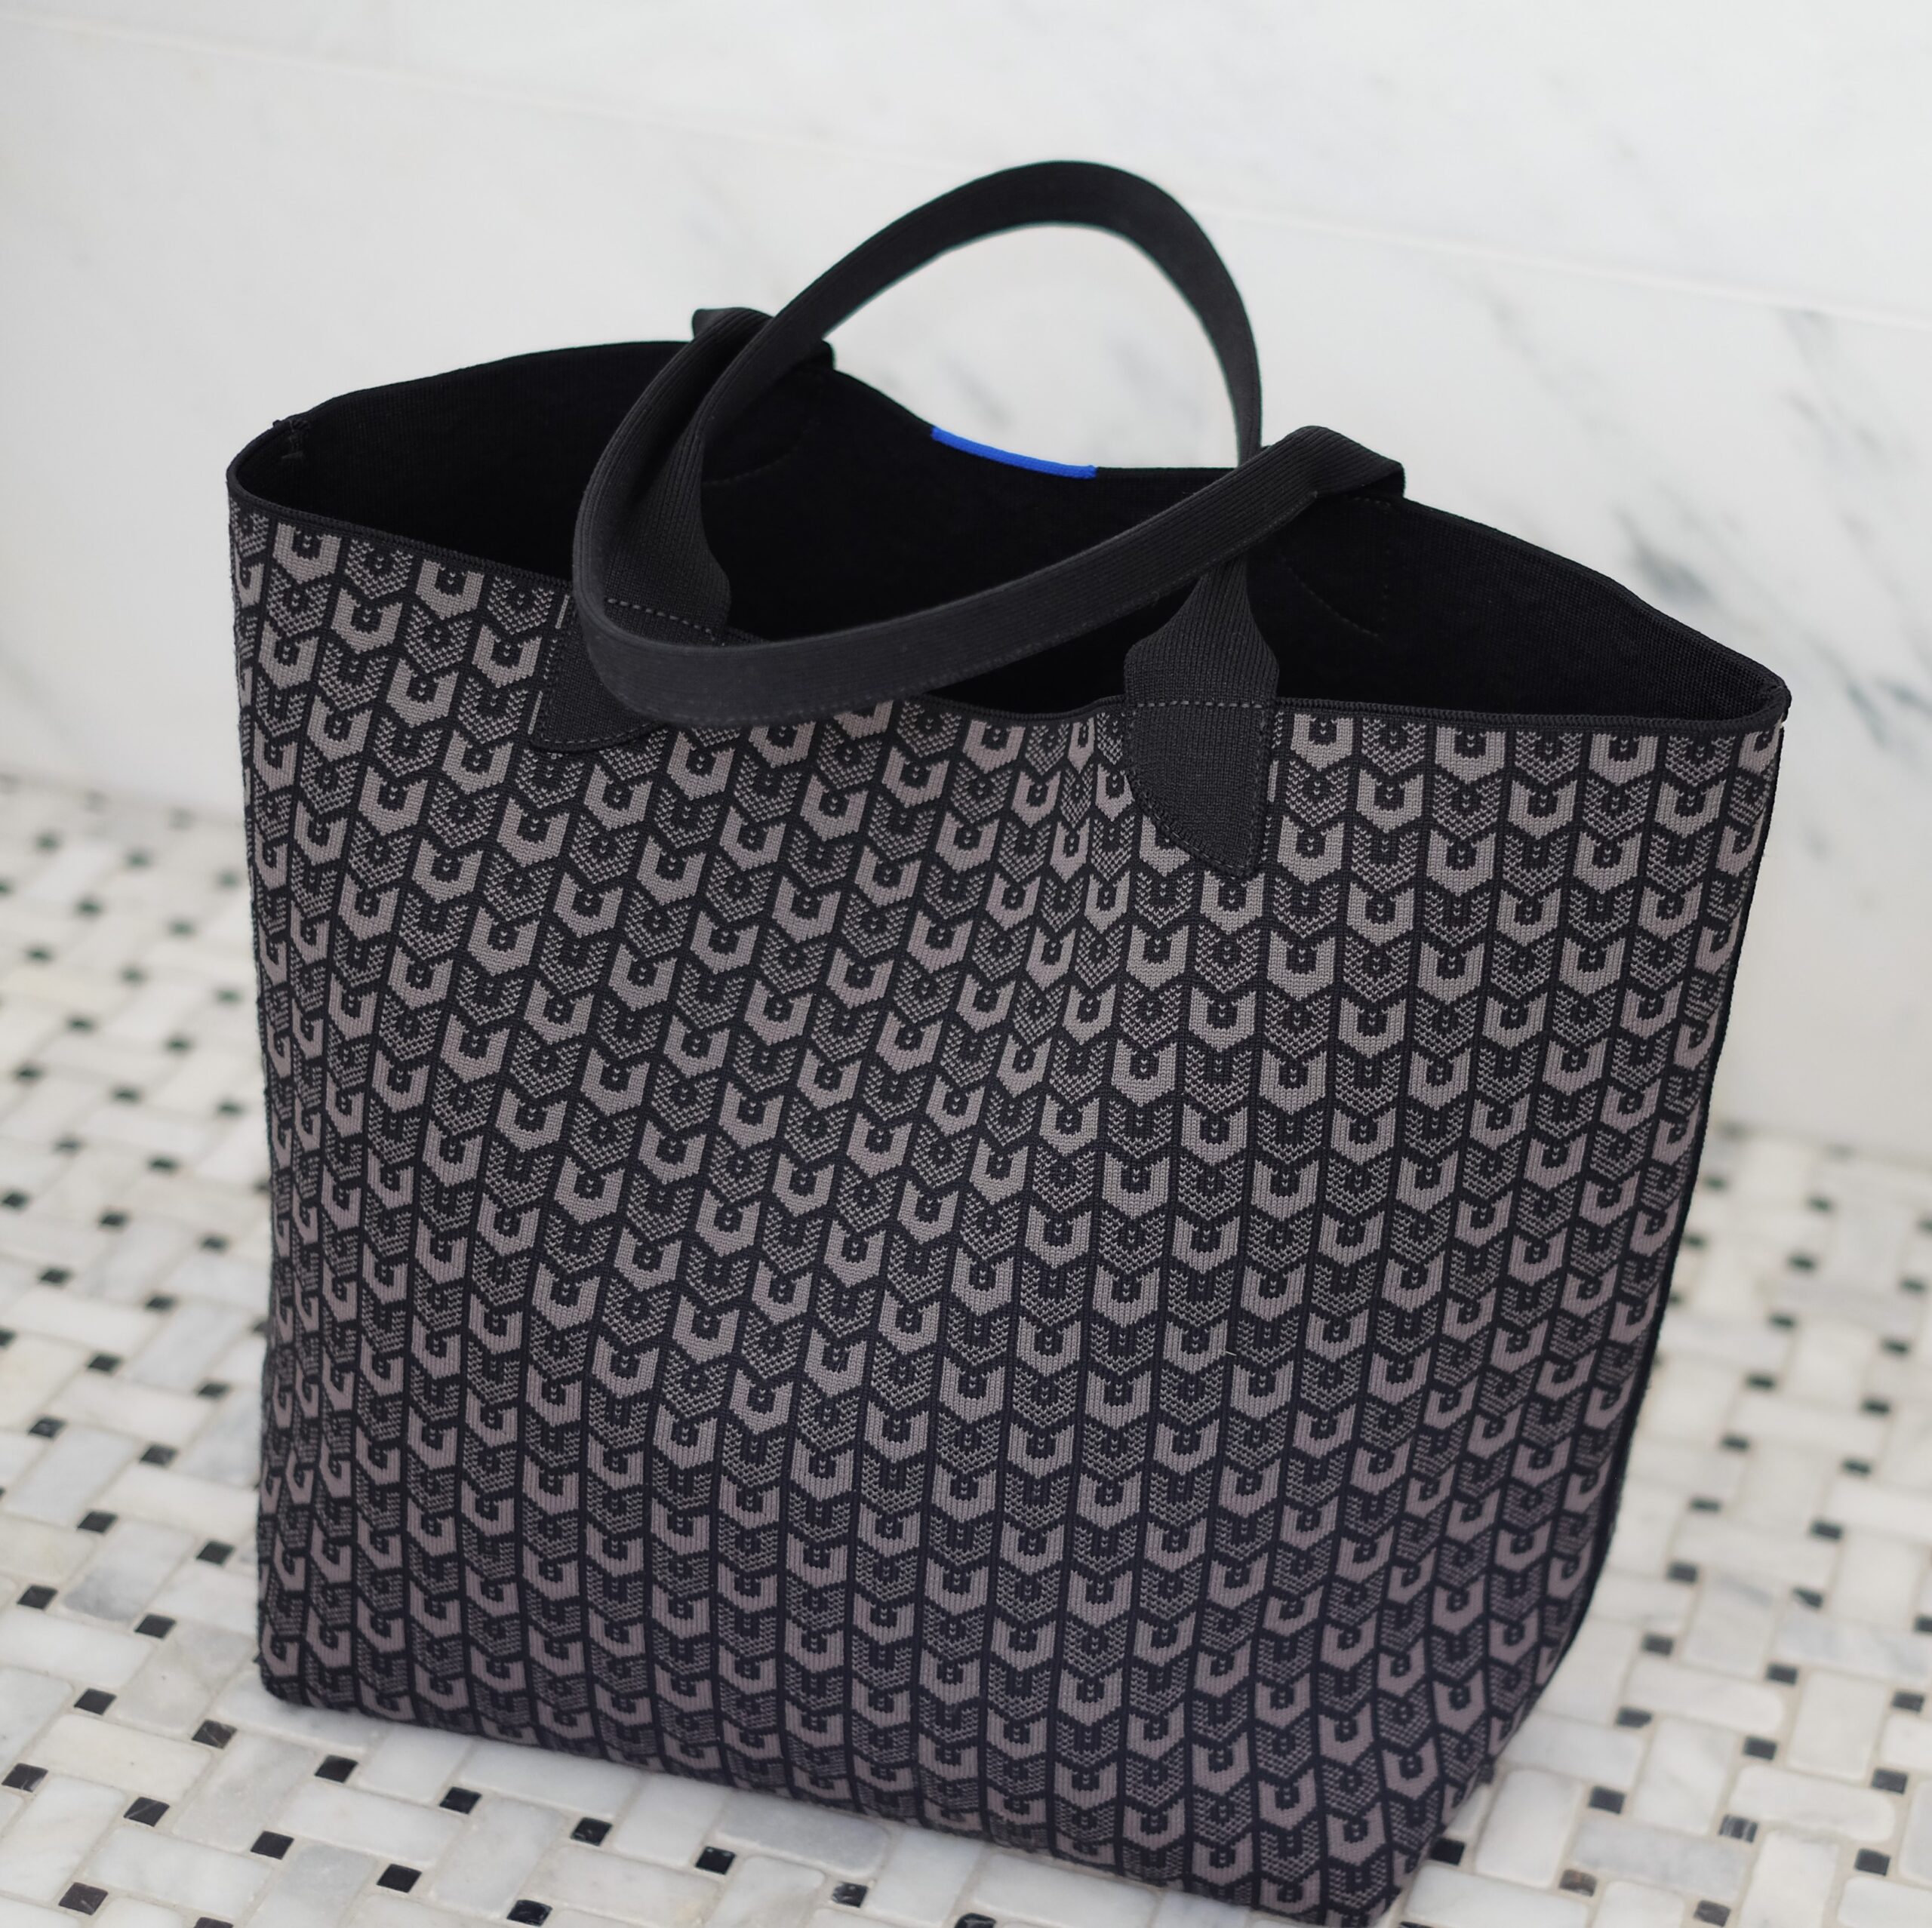 Rothys the lightweight tote review pictures